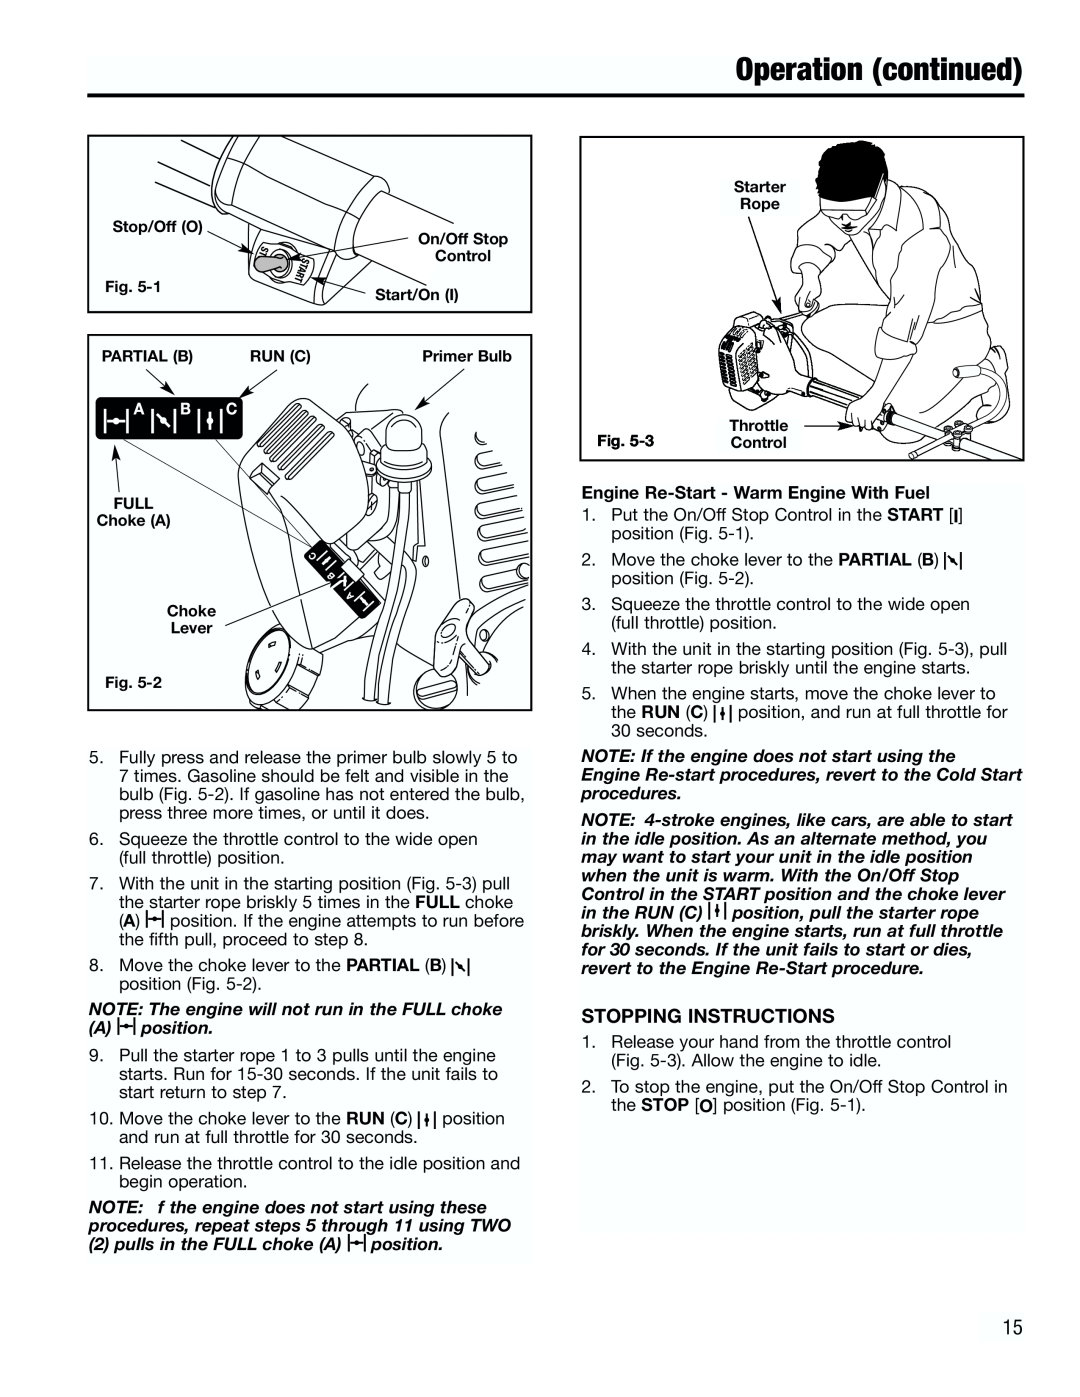 Troy-Bilt TB4000 Operation continued, Stopping Instructions, NOTE The engine will not run in the FULL choke A position 